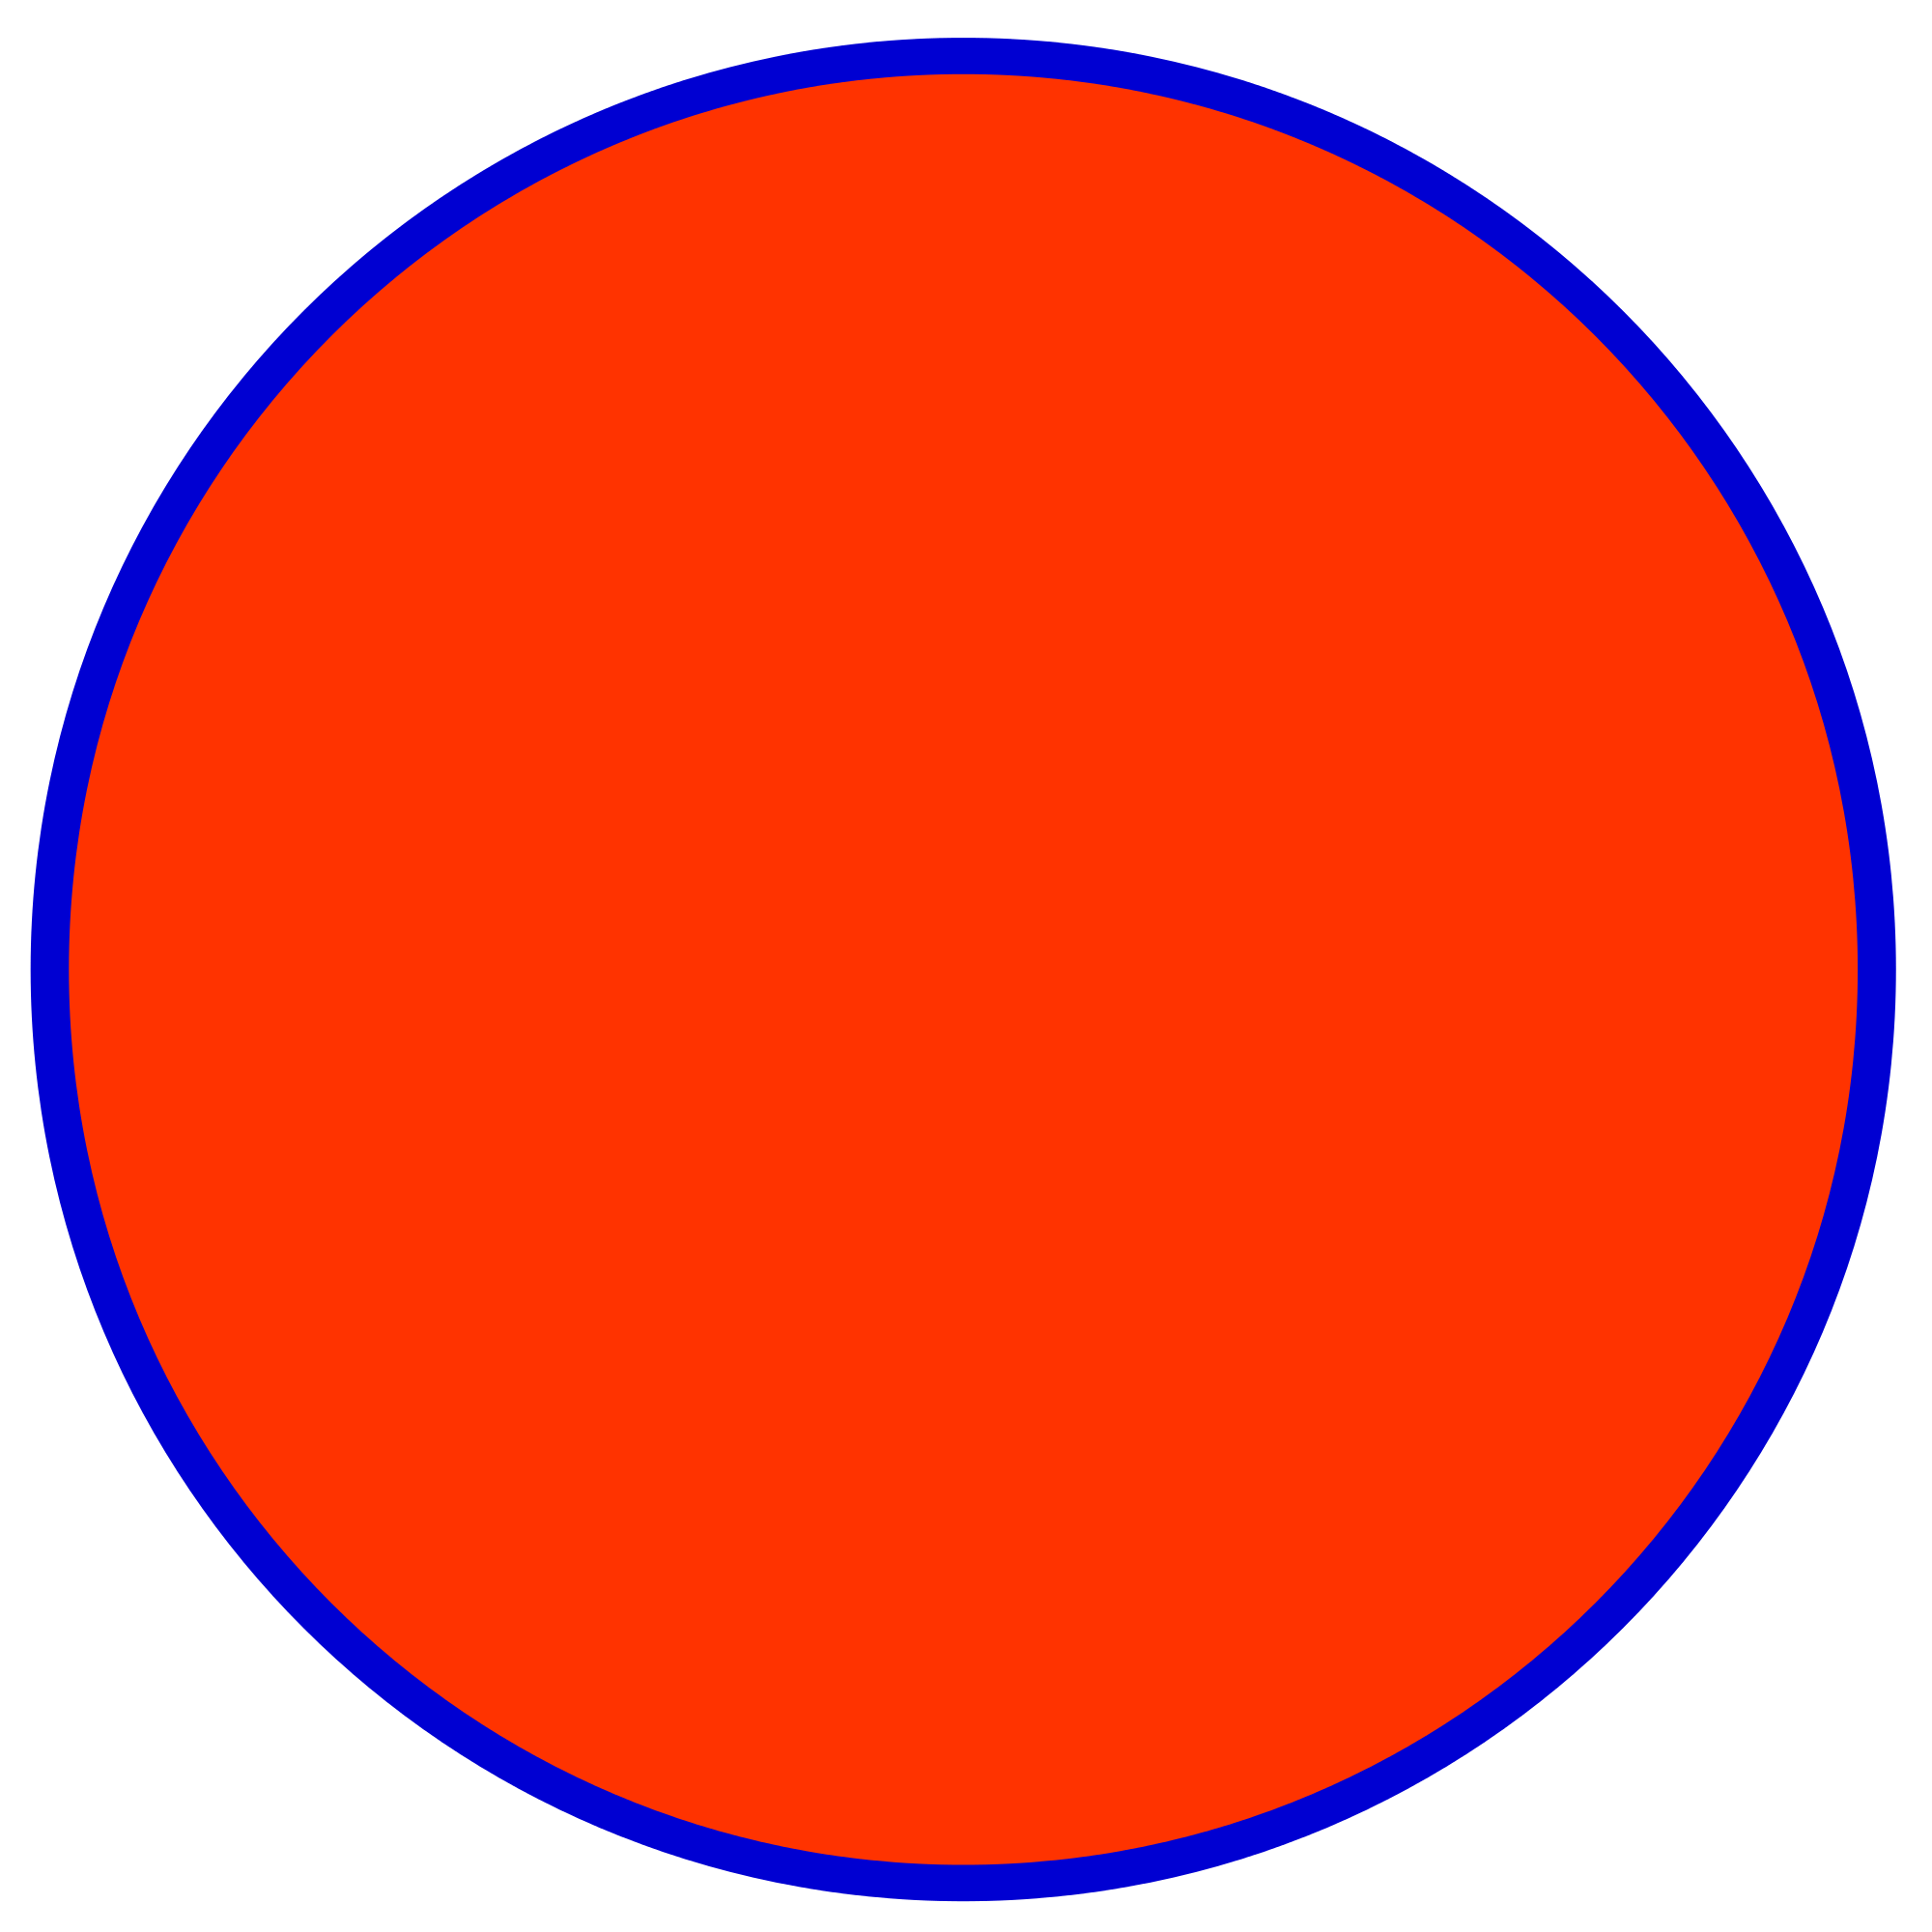 Red-Orange and Blue Circle Logo - File:Red blue circle.svg - Wikimedia Commons